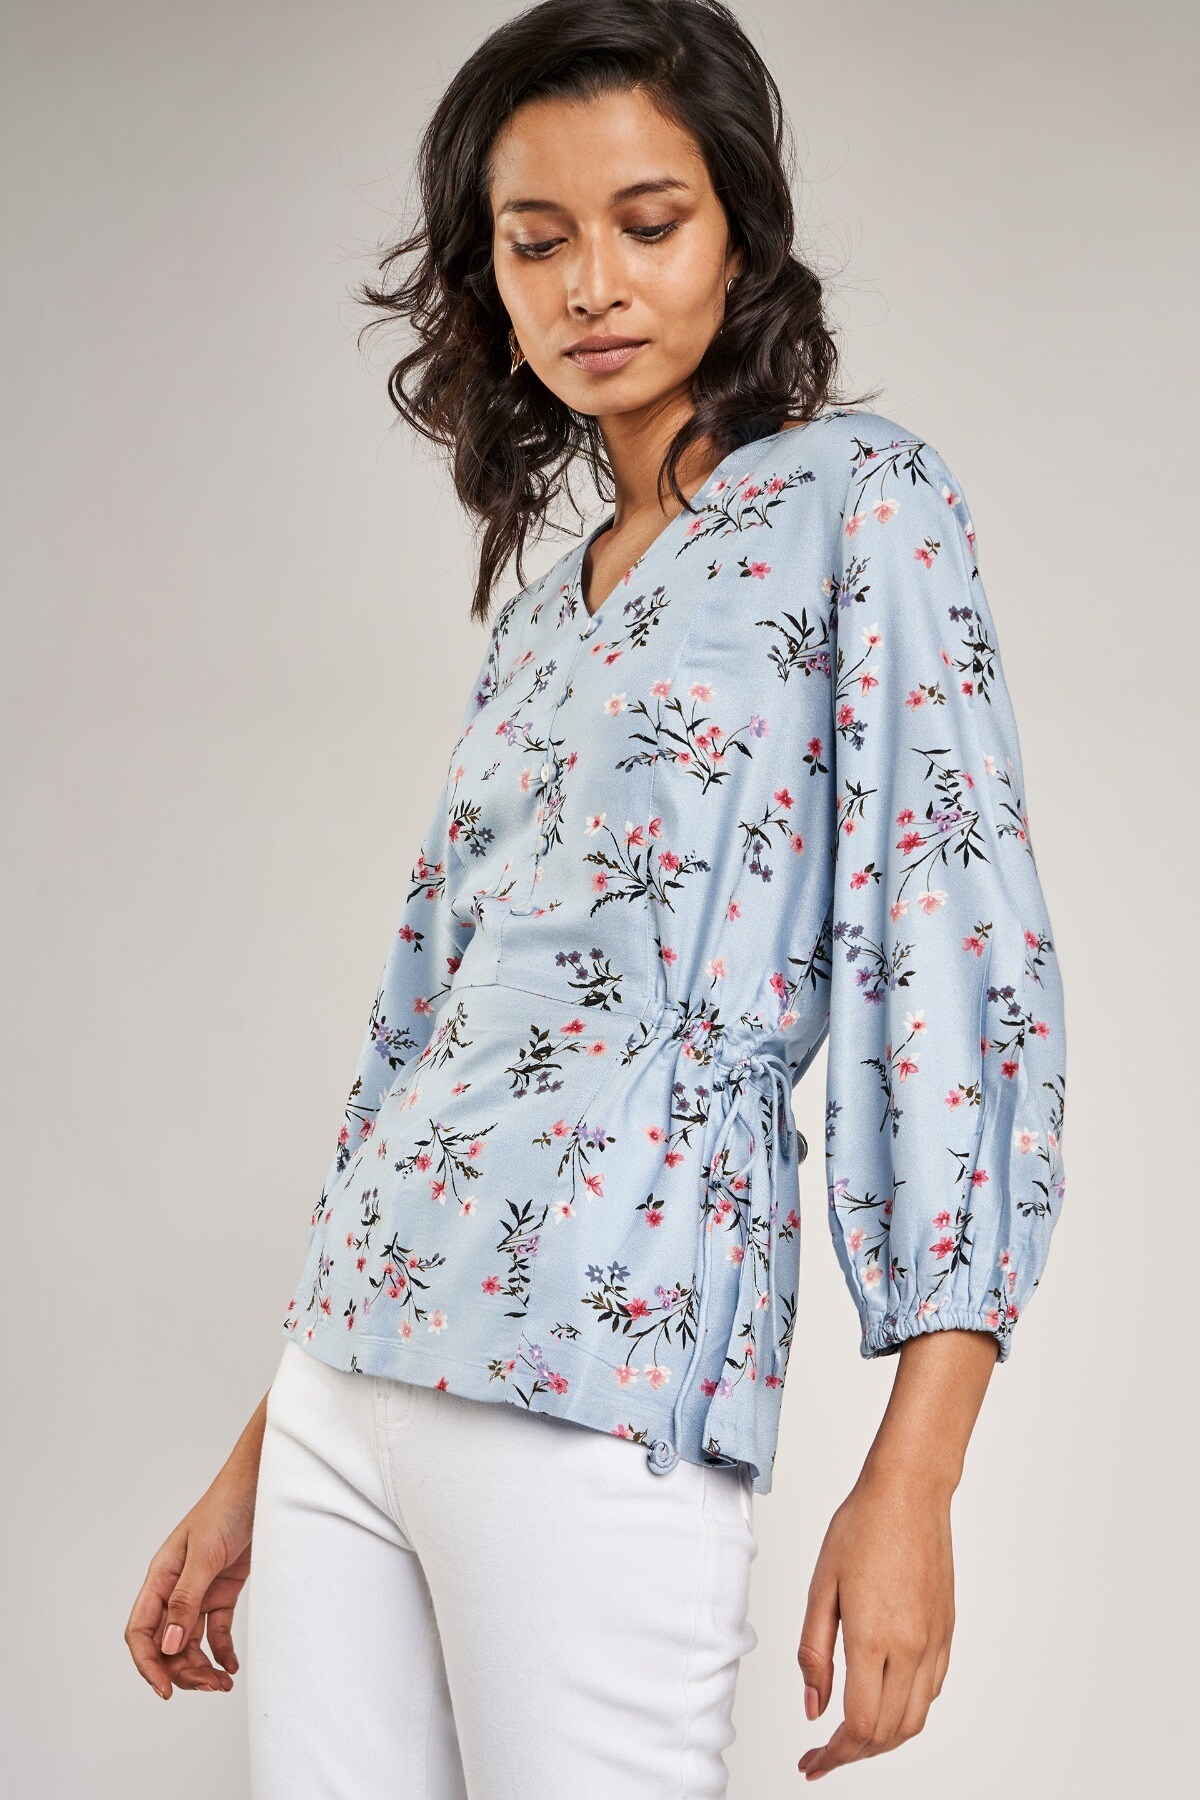 AND | Powder Blue Floral Printed Peplum Top 1